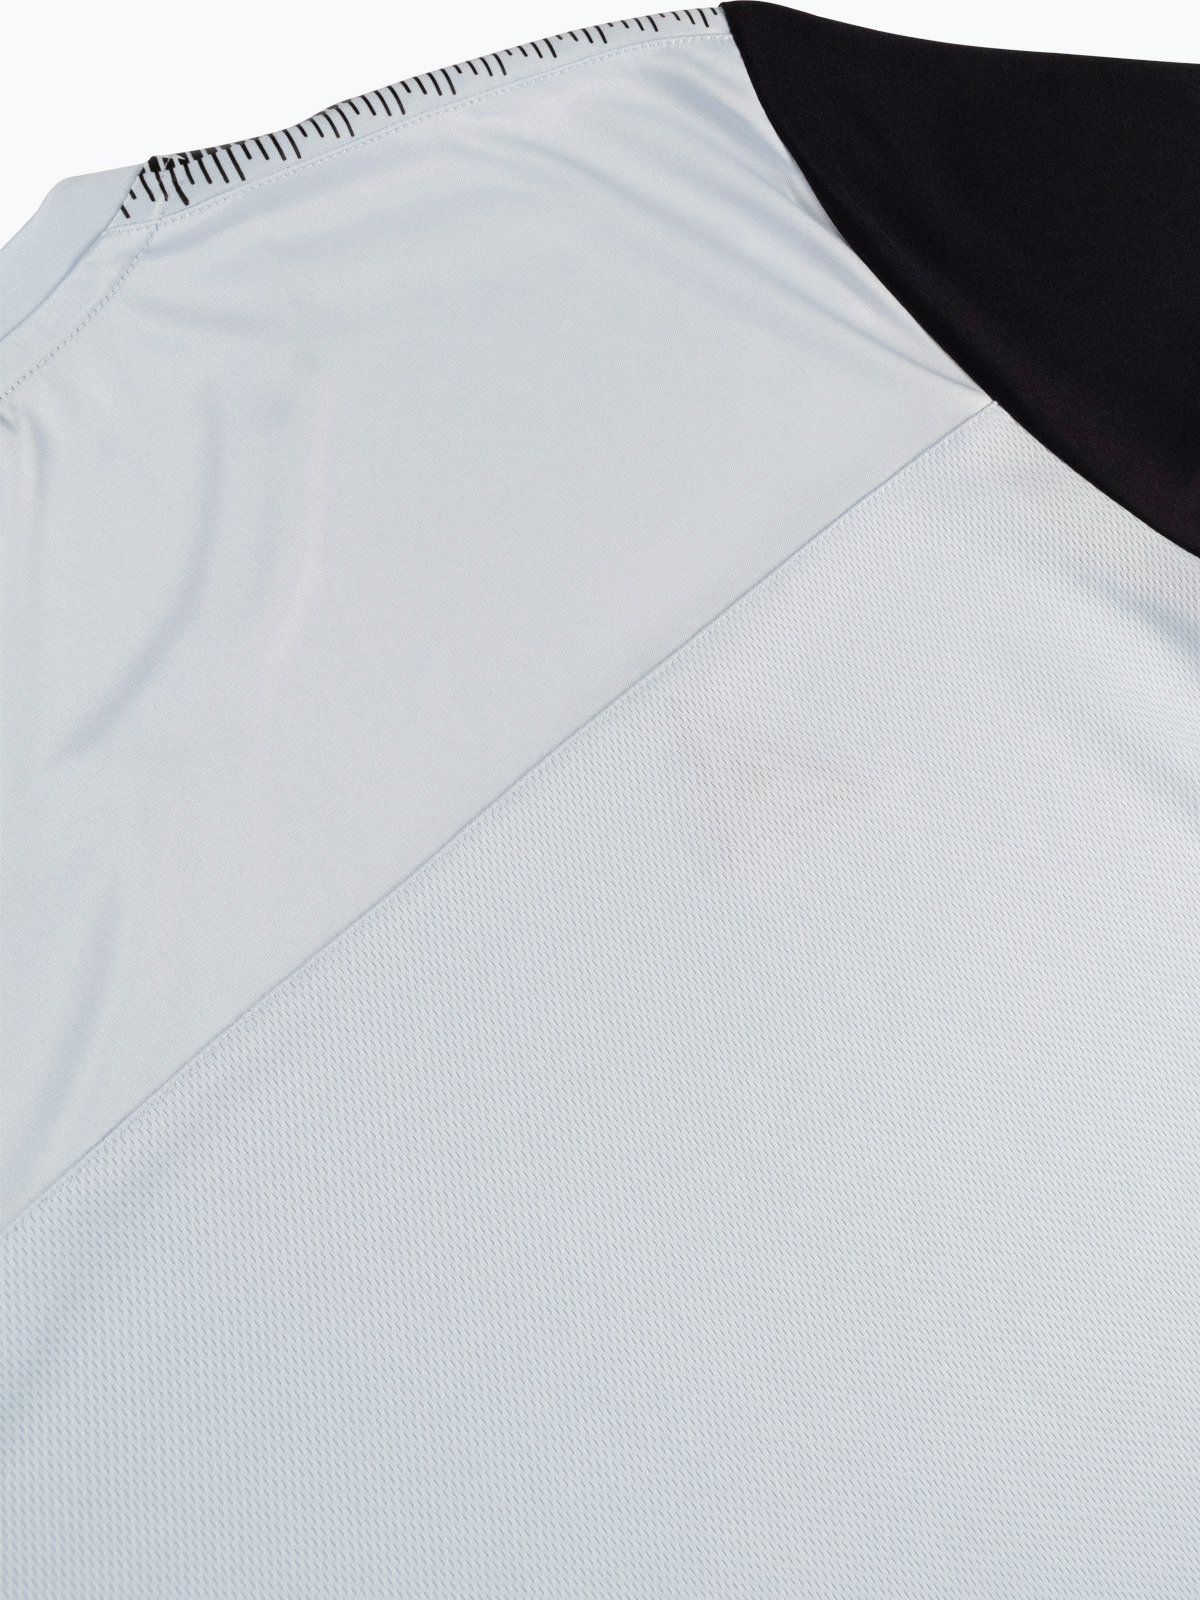 picture of pro player jersey - grey